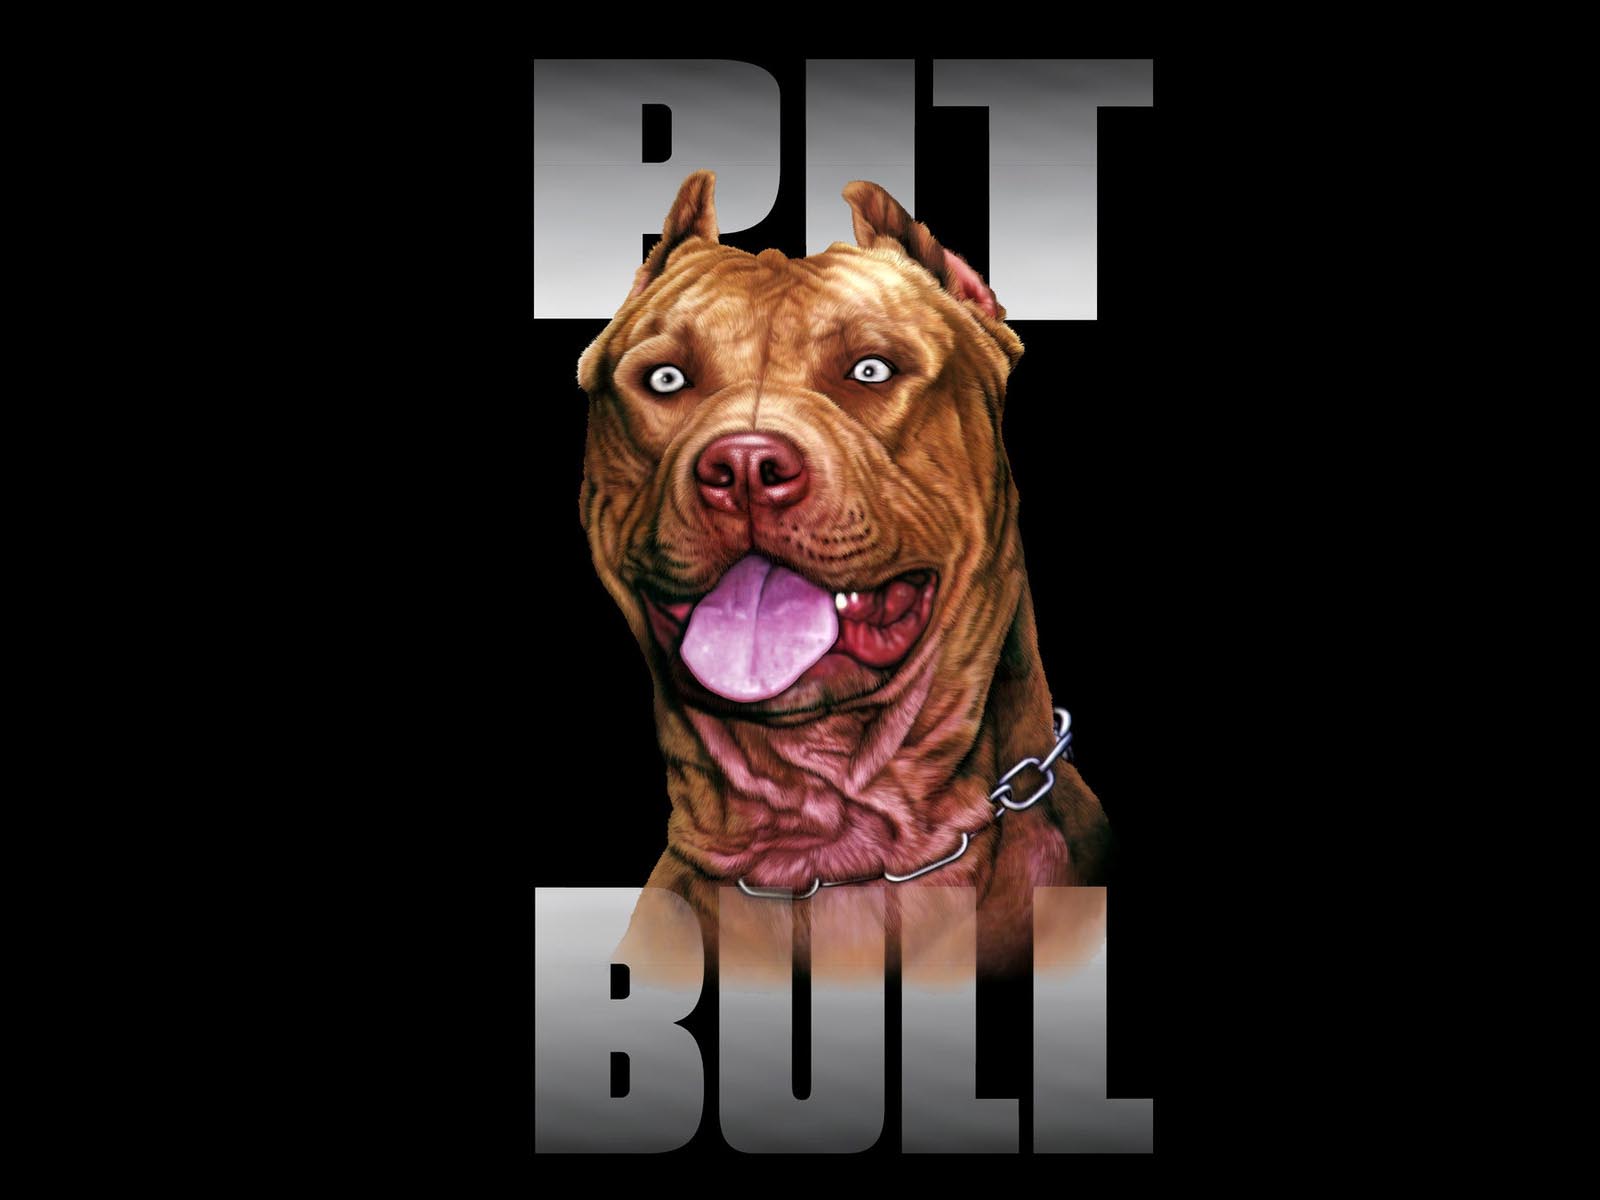 images of a pitbull dog download